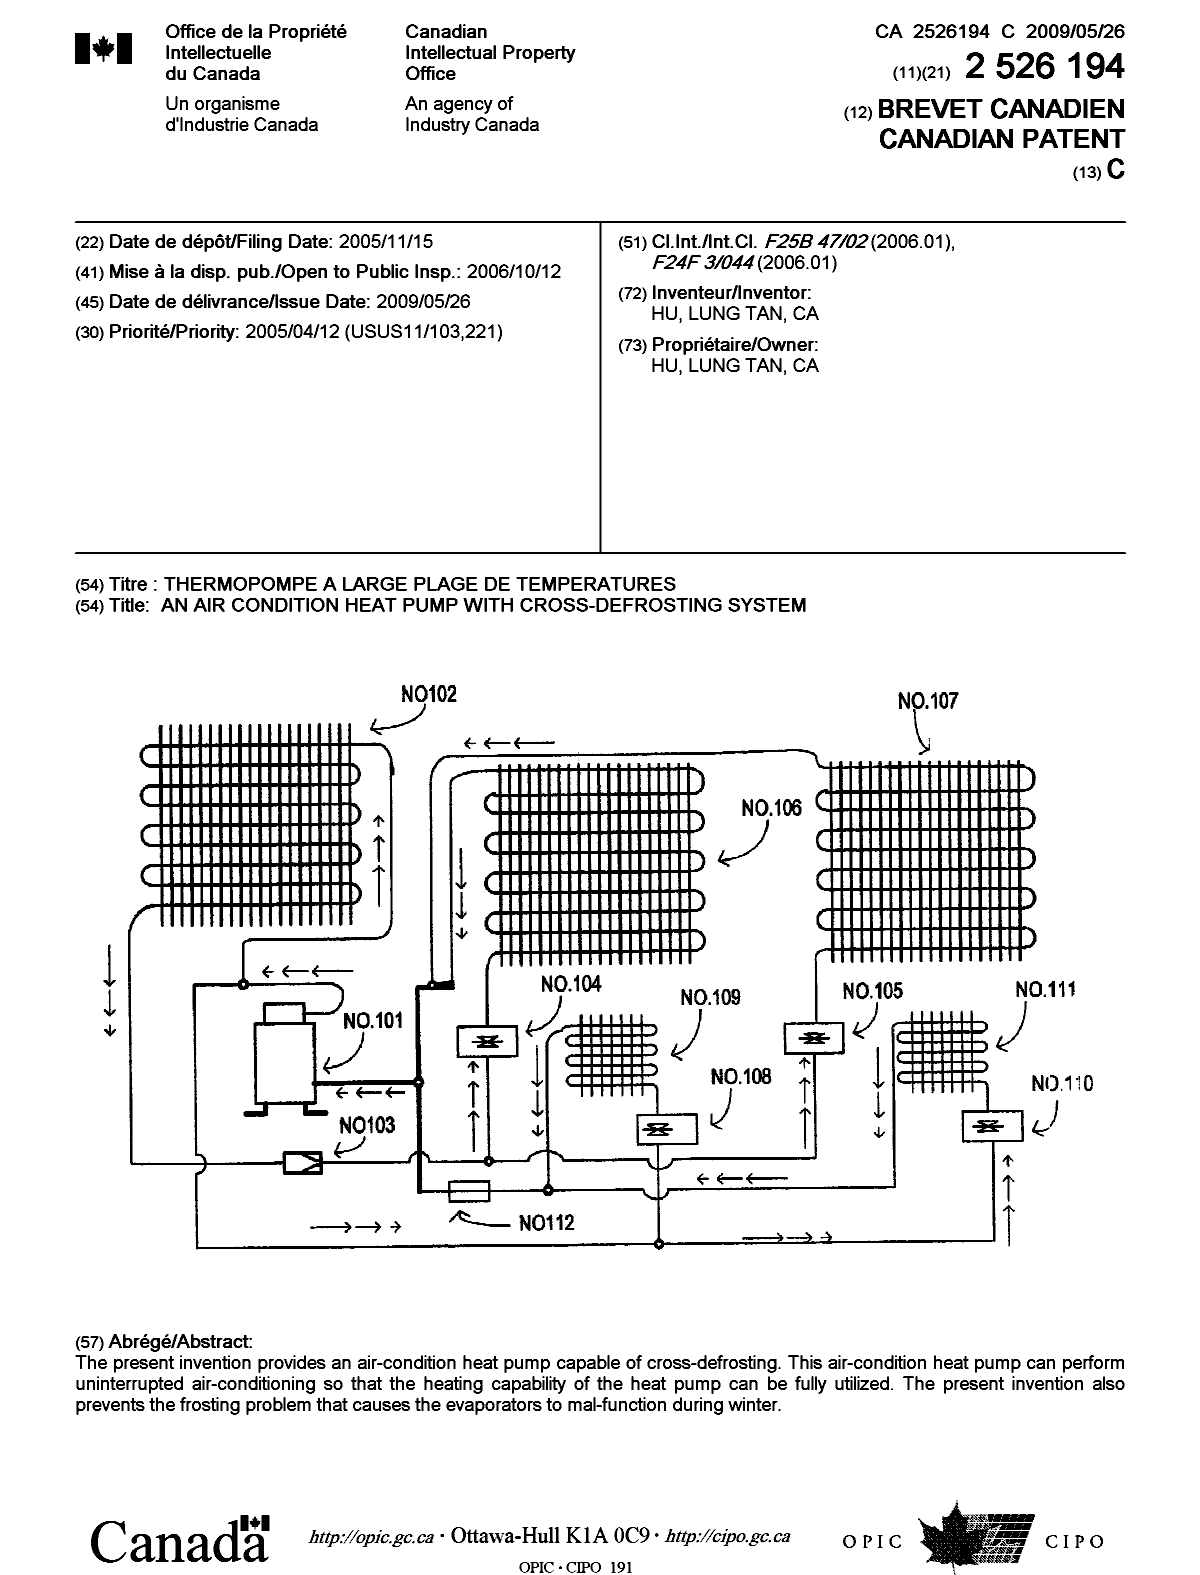 Canadian Patent Document 2526194. Cover Page 20090506. Image 1 of 1